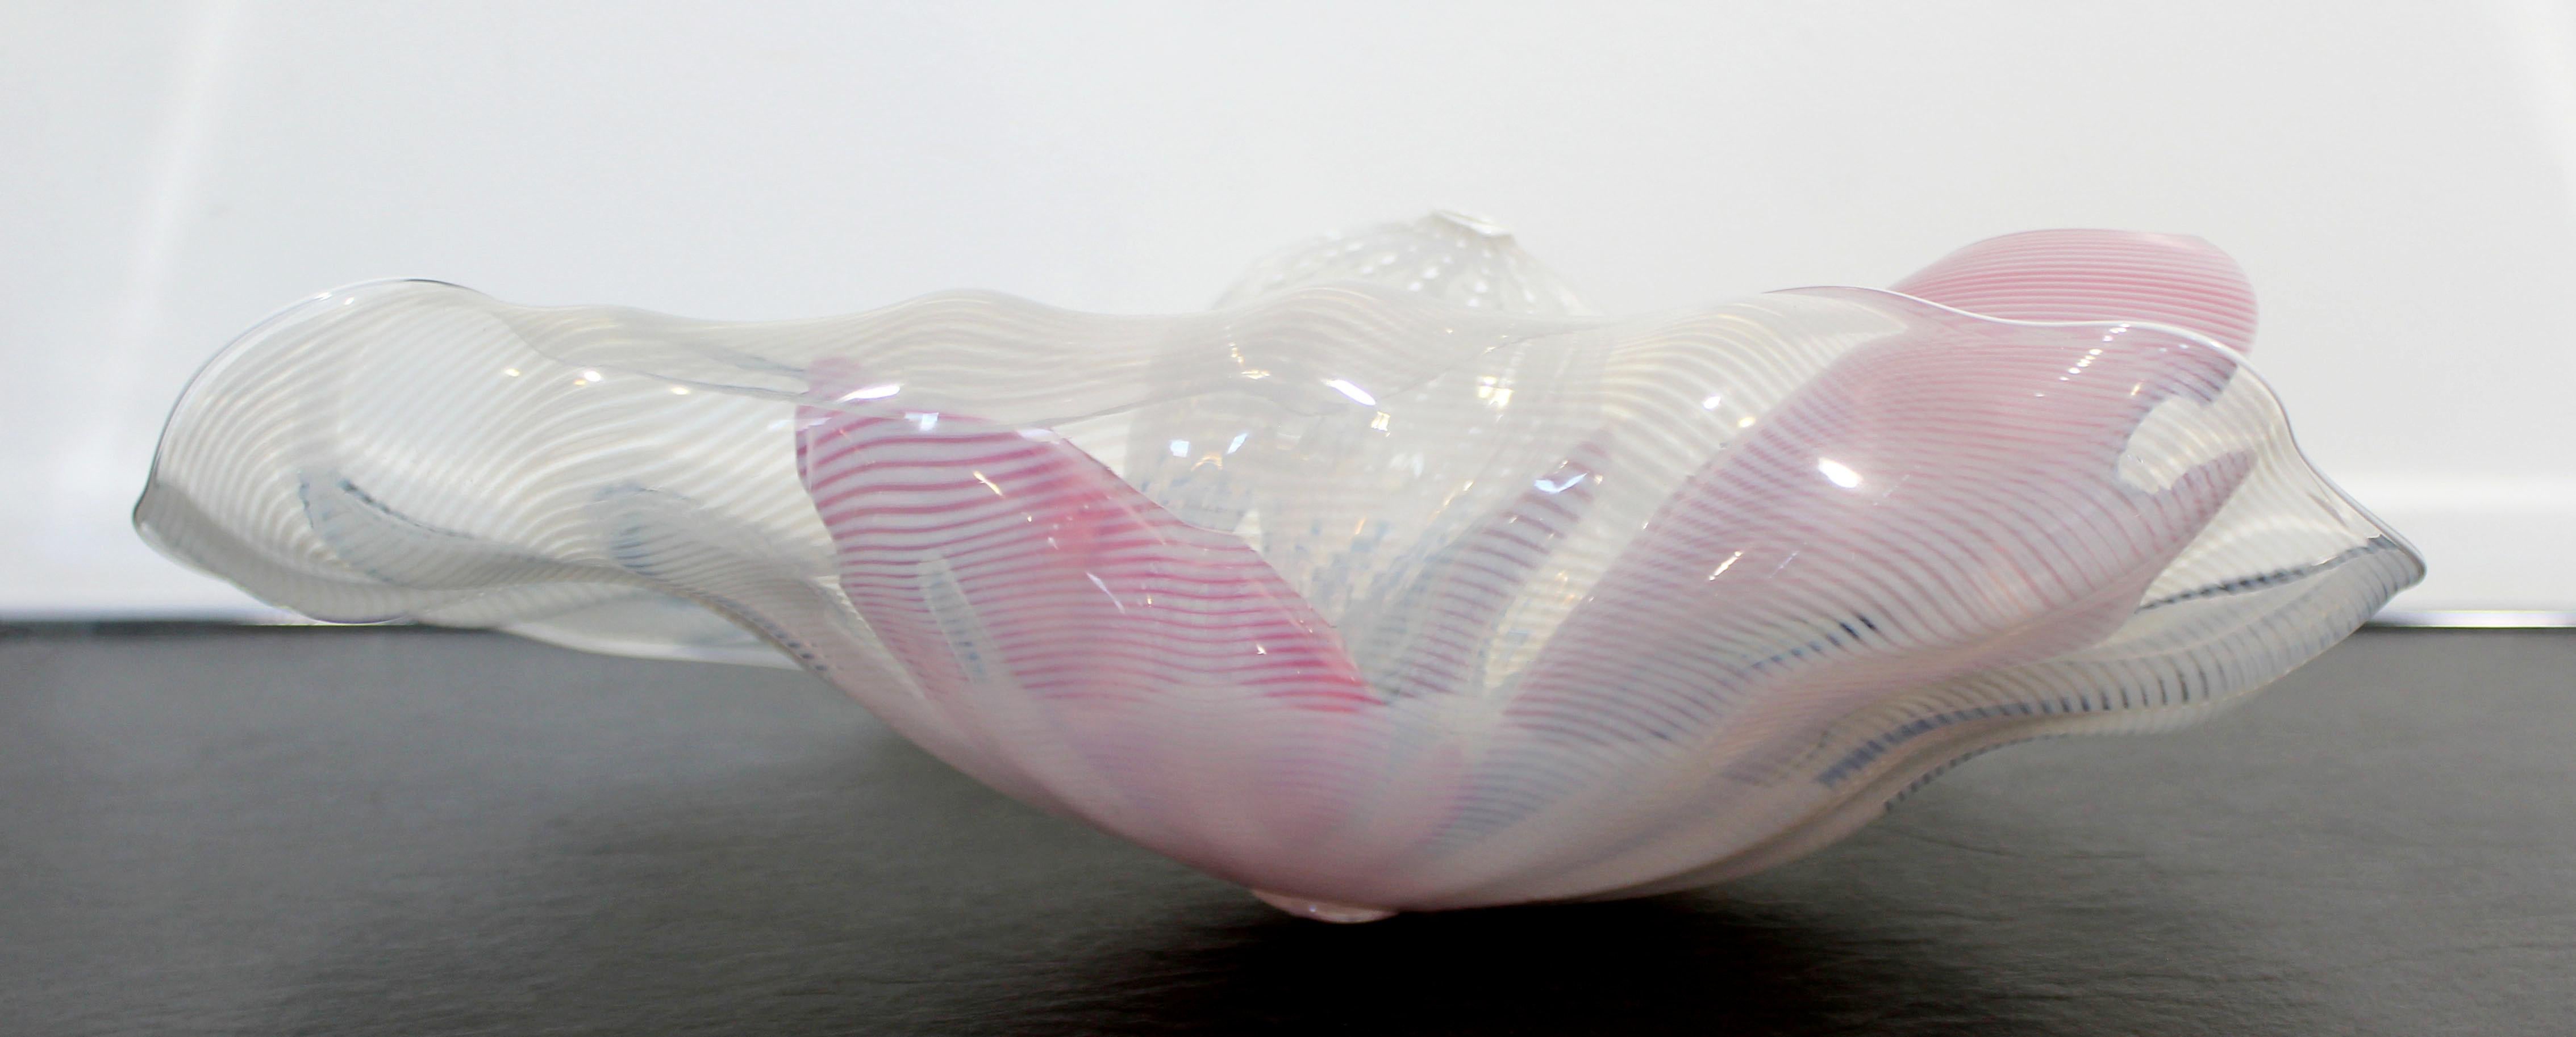 Mid-20th Century Contemporary Dale Chihuly 4-Piece Glass Sea Shell Art Table Sculpture 1990s Pink